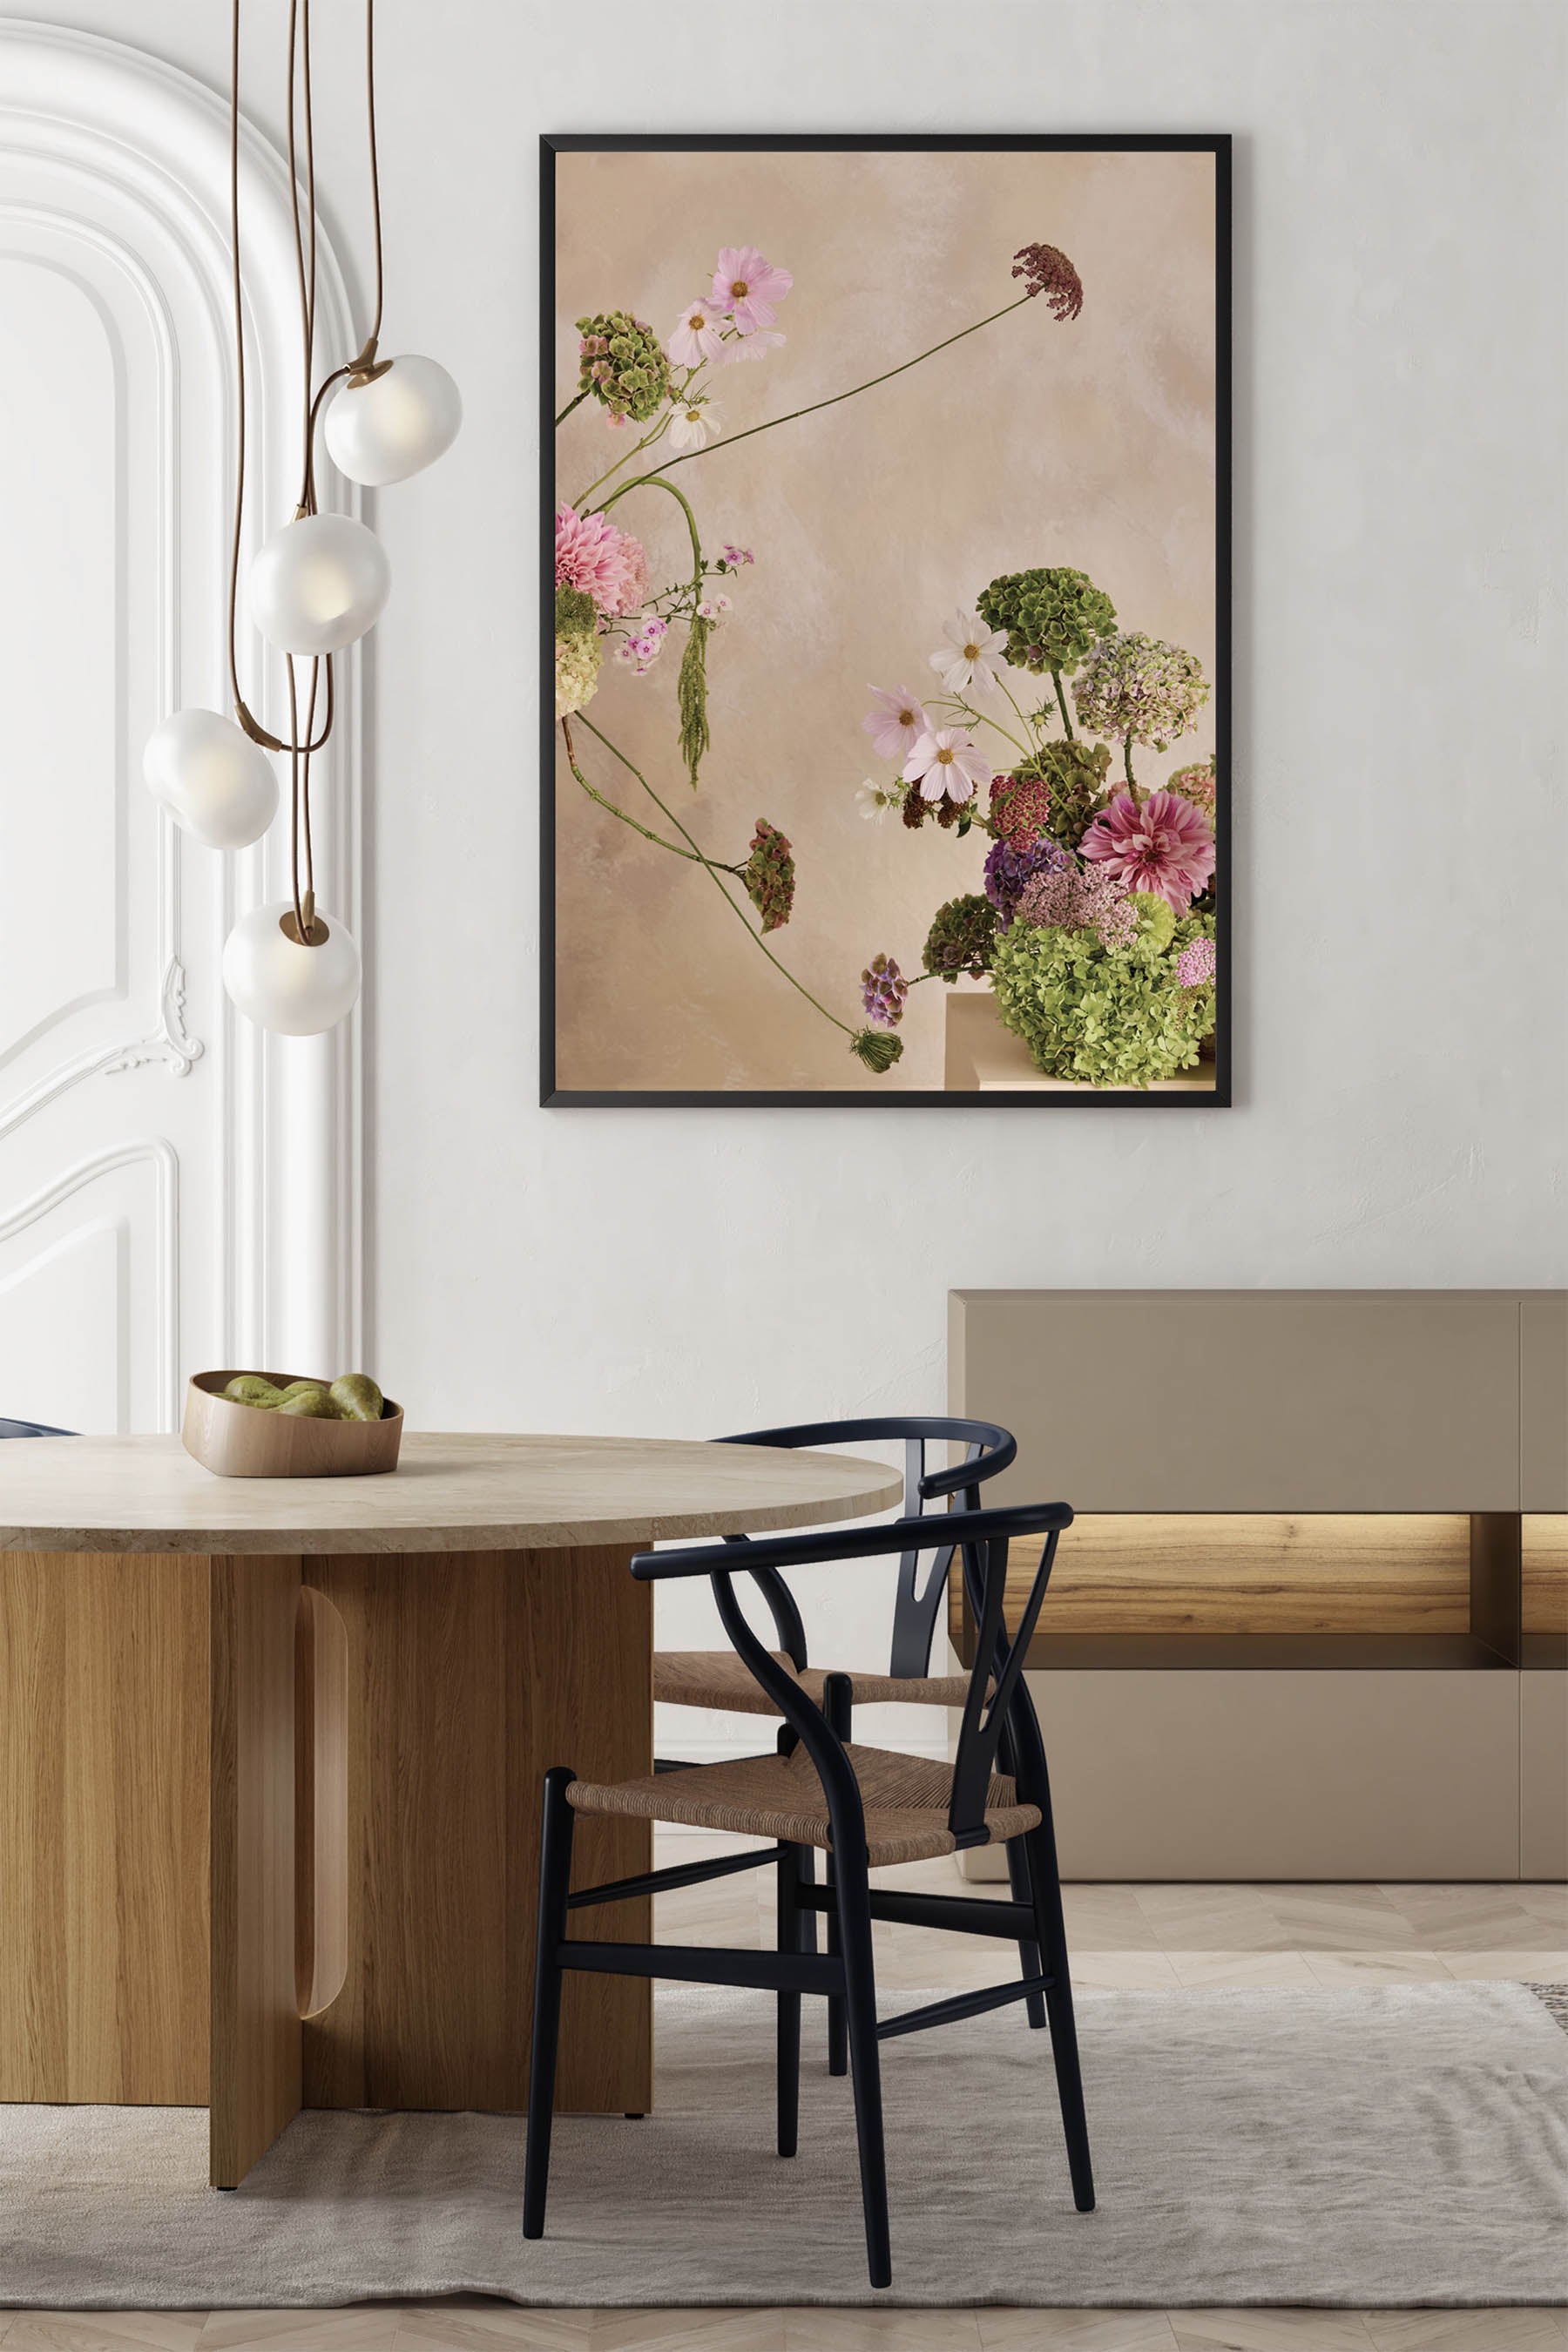 Whimsical Floral Abstract Arrangement against a Linen colour hand painted background Fine Art Print By Austin Bloom A1 size framed in Wenge in a dining room.